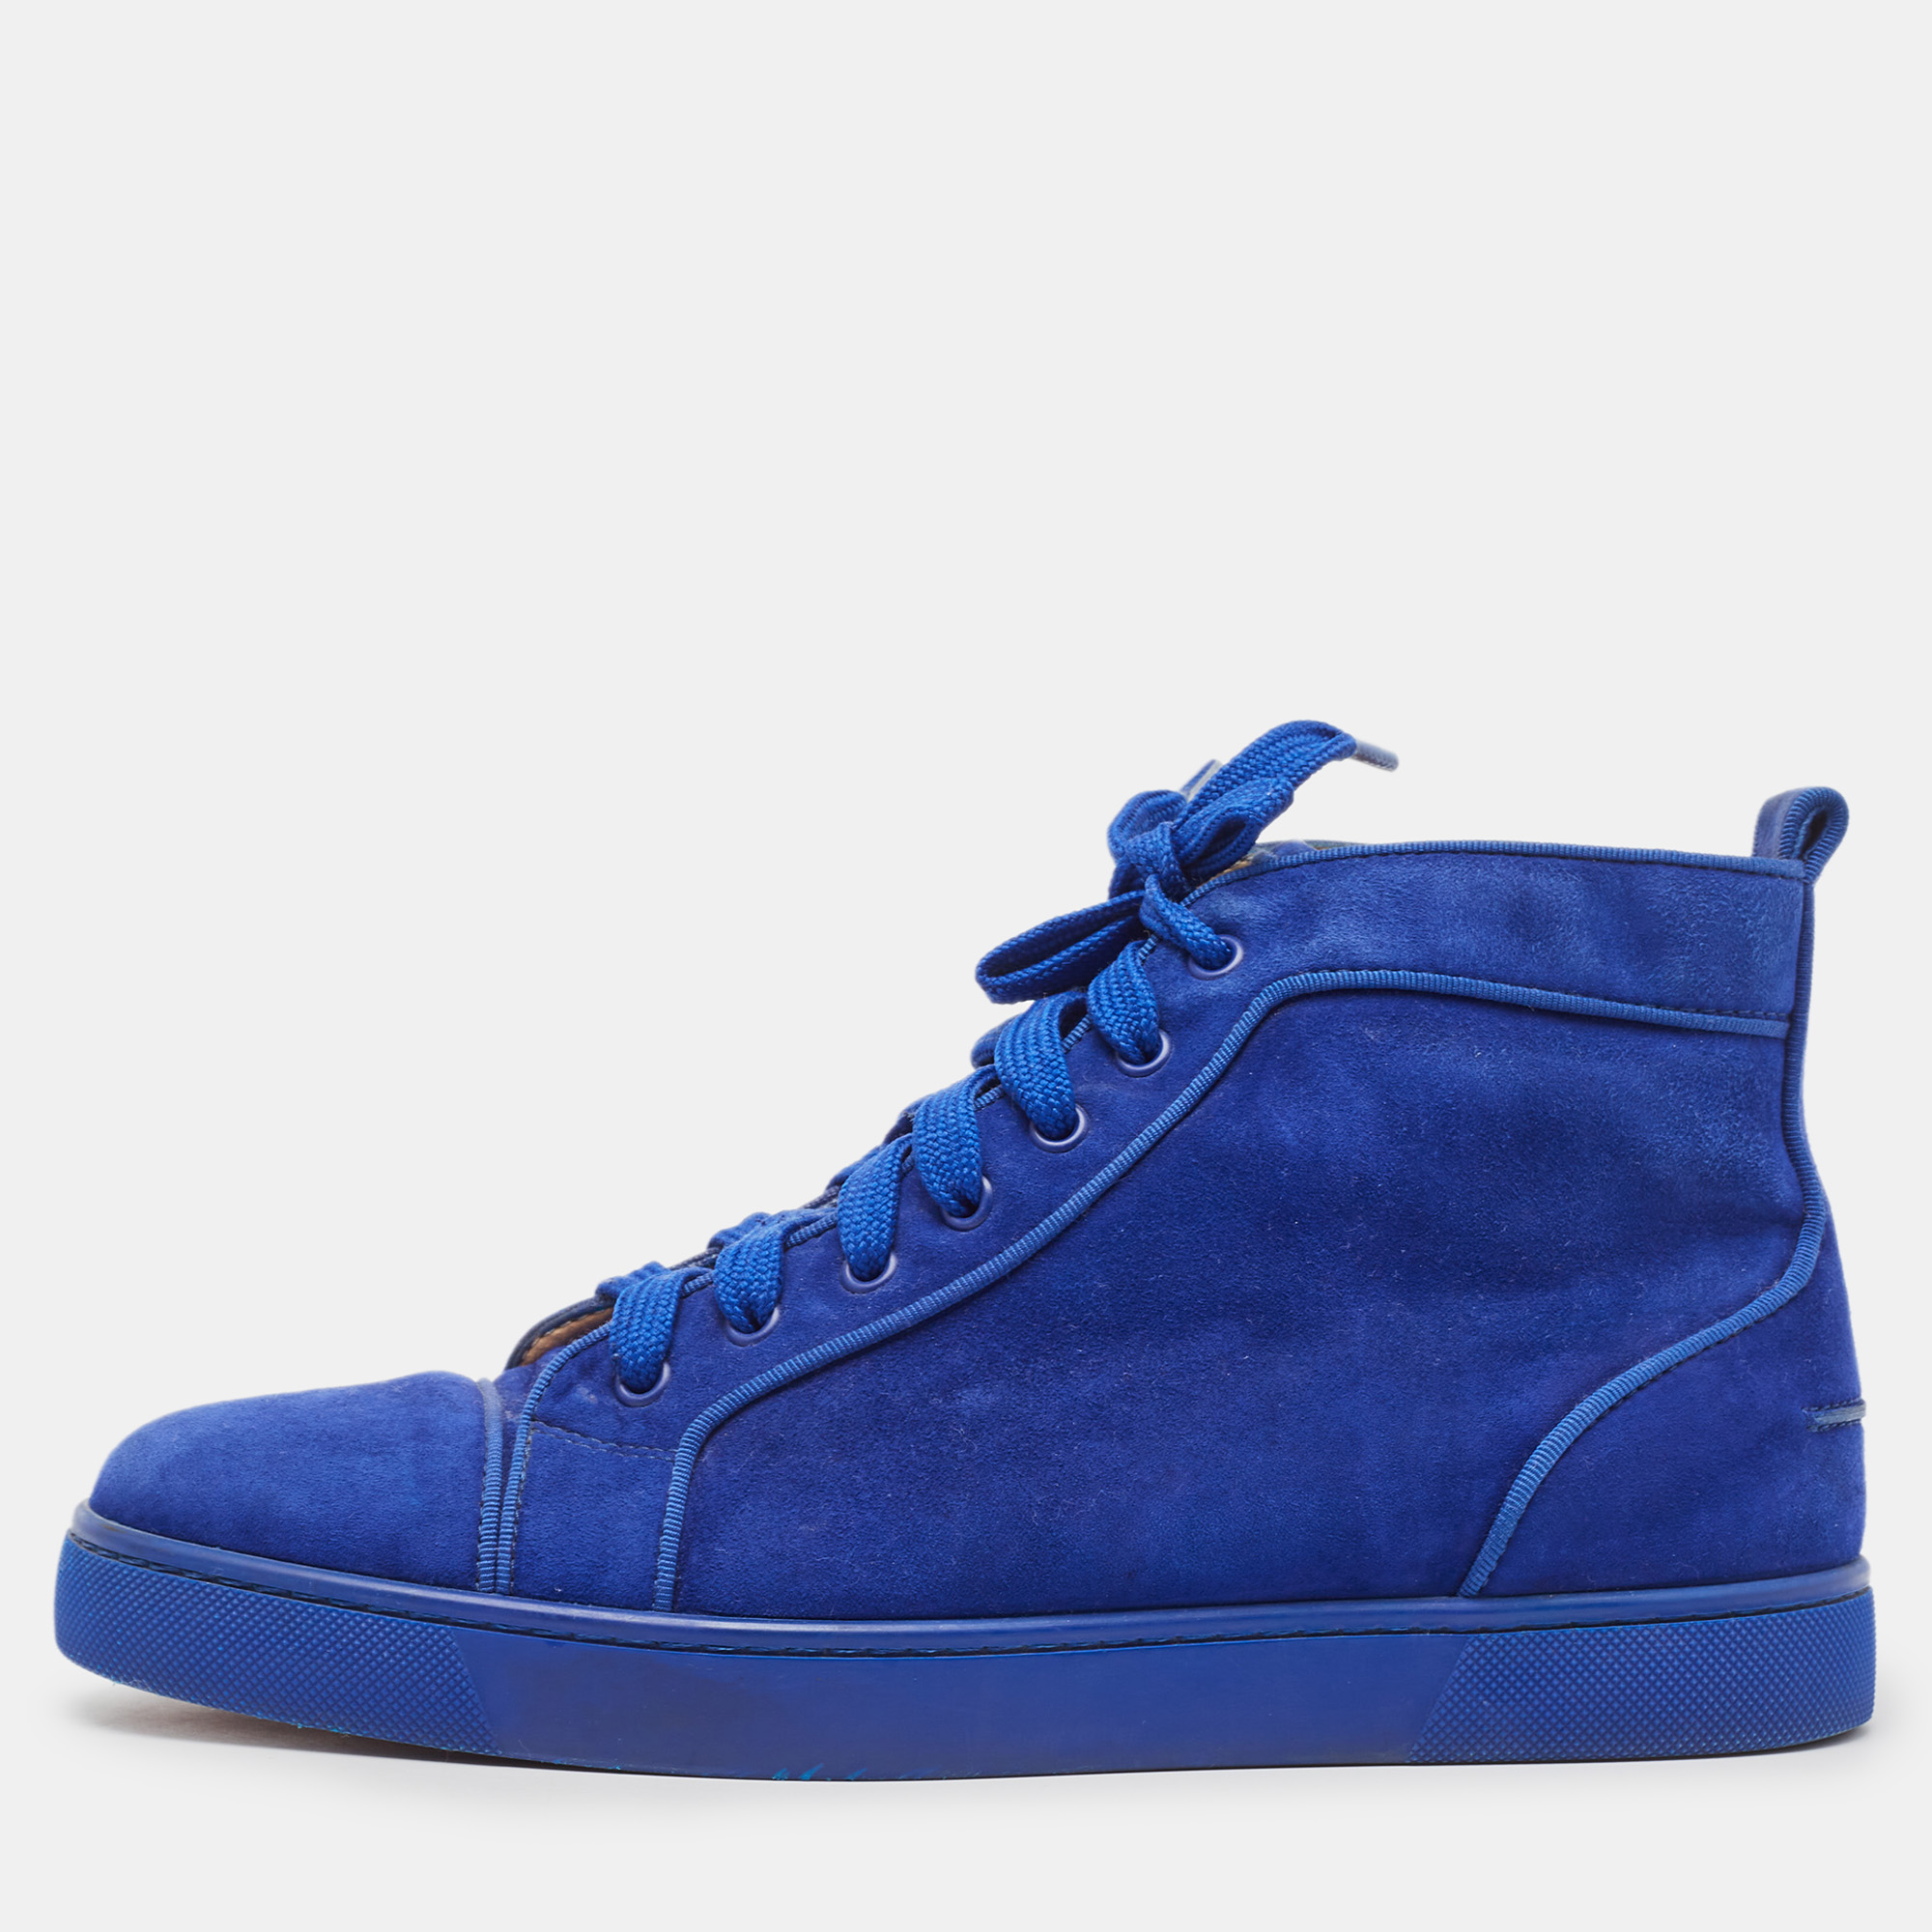 Christian louboutin blue suede leather low top sneakers size 42